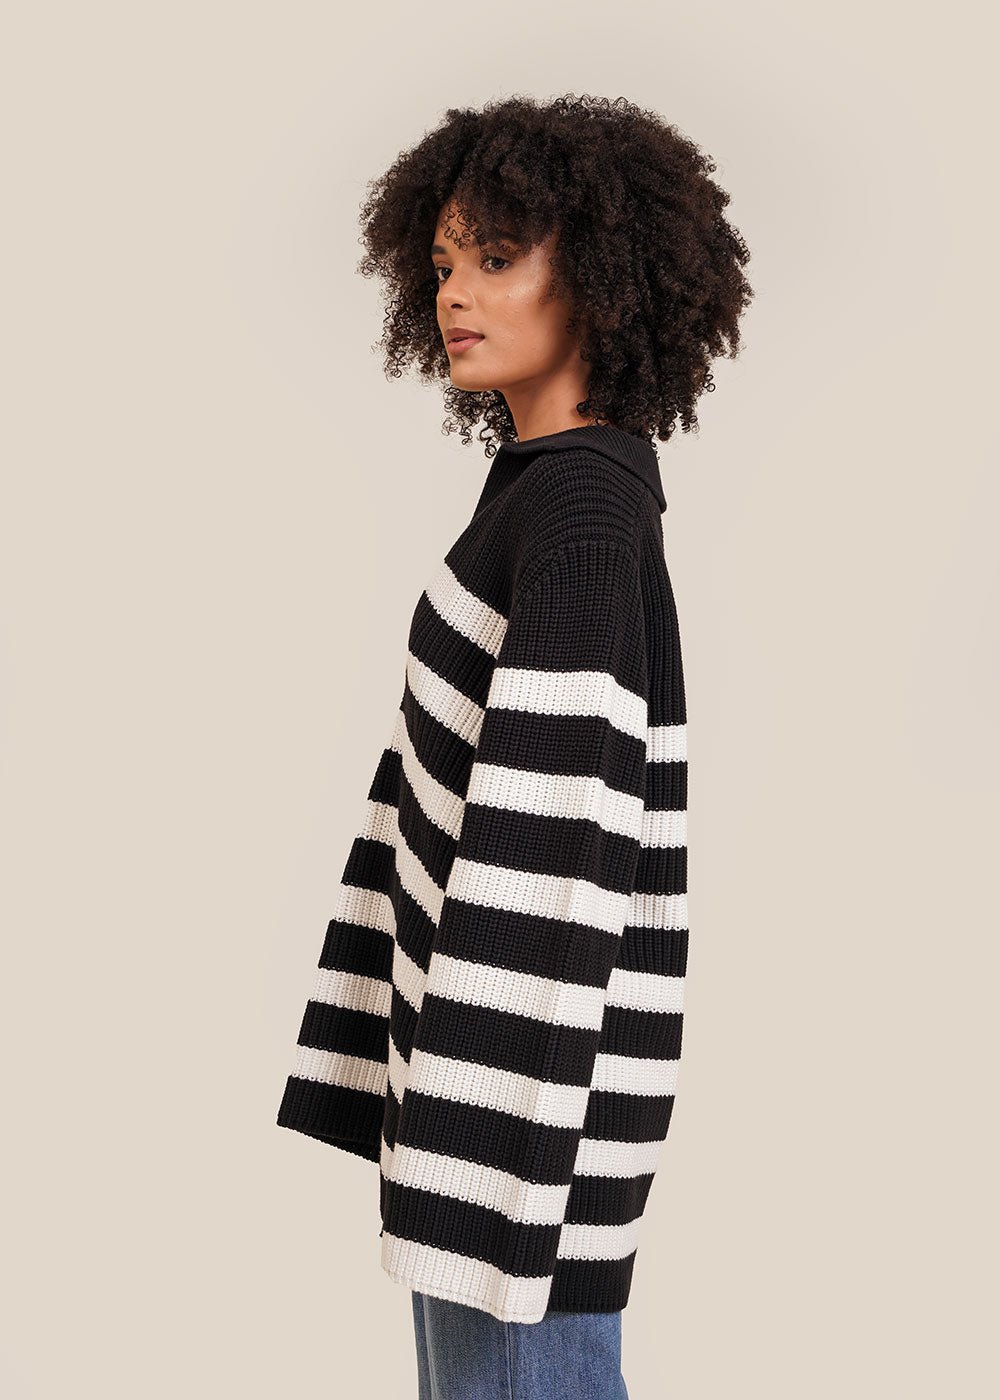 Stylein Striped Arien Sweater - New Classics Studios Sustainable Ethical Fashion Canada